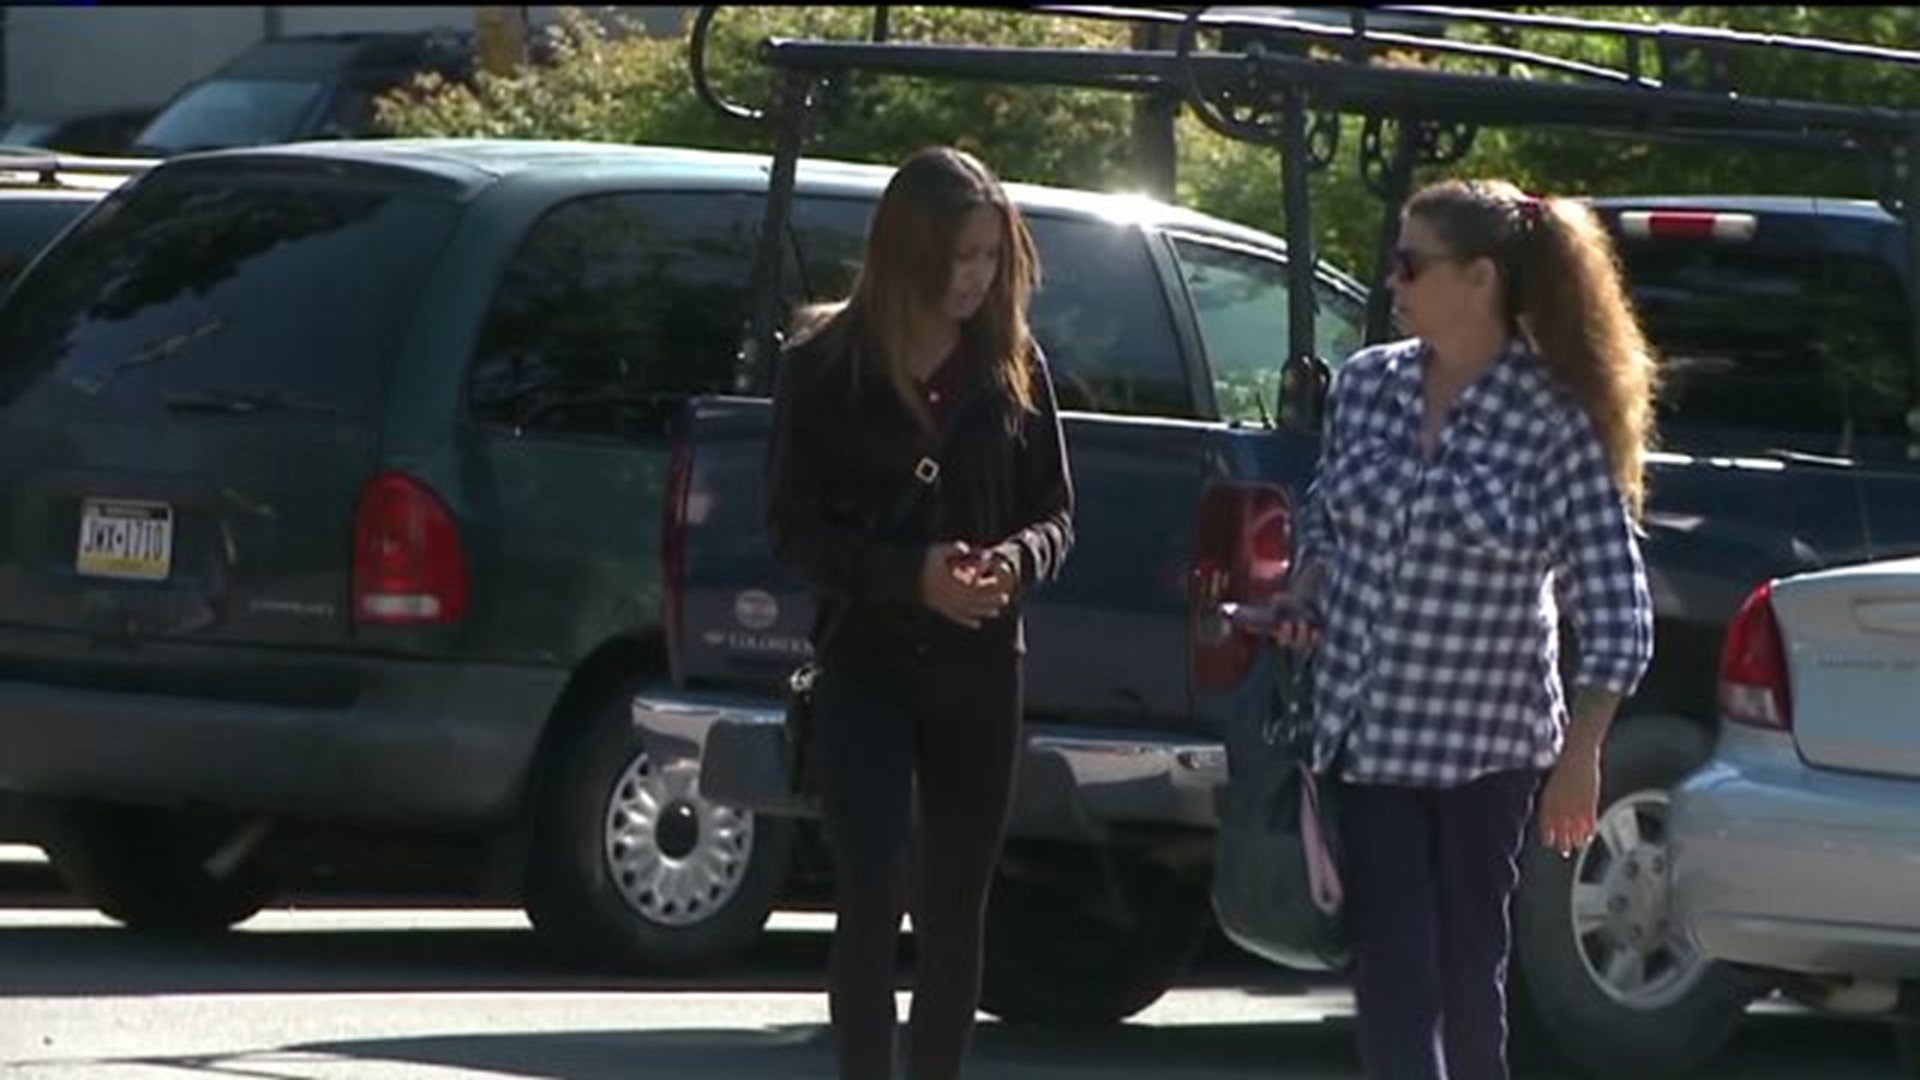 Wilkes-barre Kidnapping Victim Says She Was Not Kidnapped